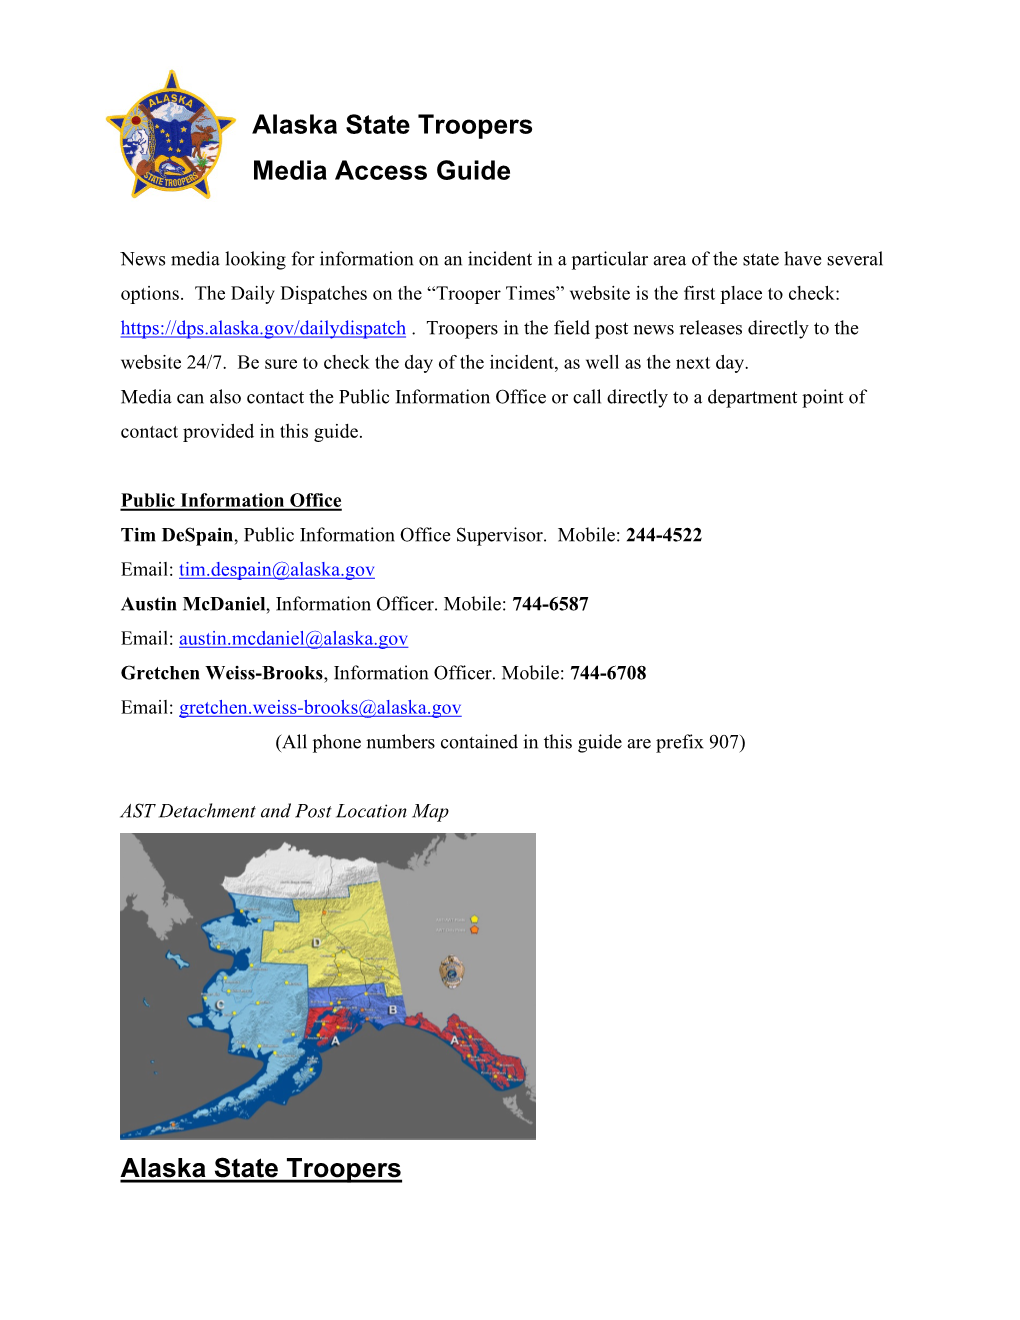 Alaska State Troopers Media Access Guide